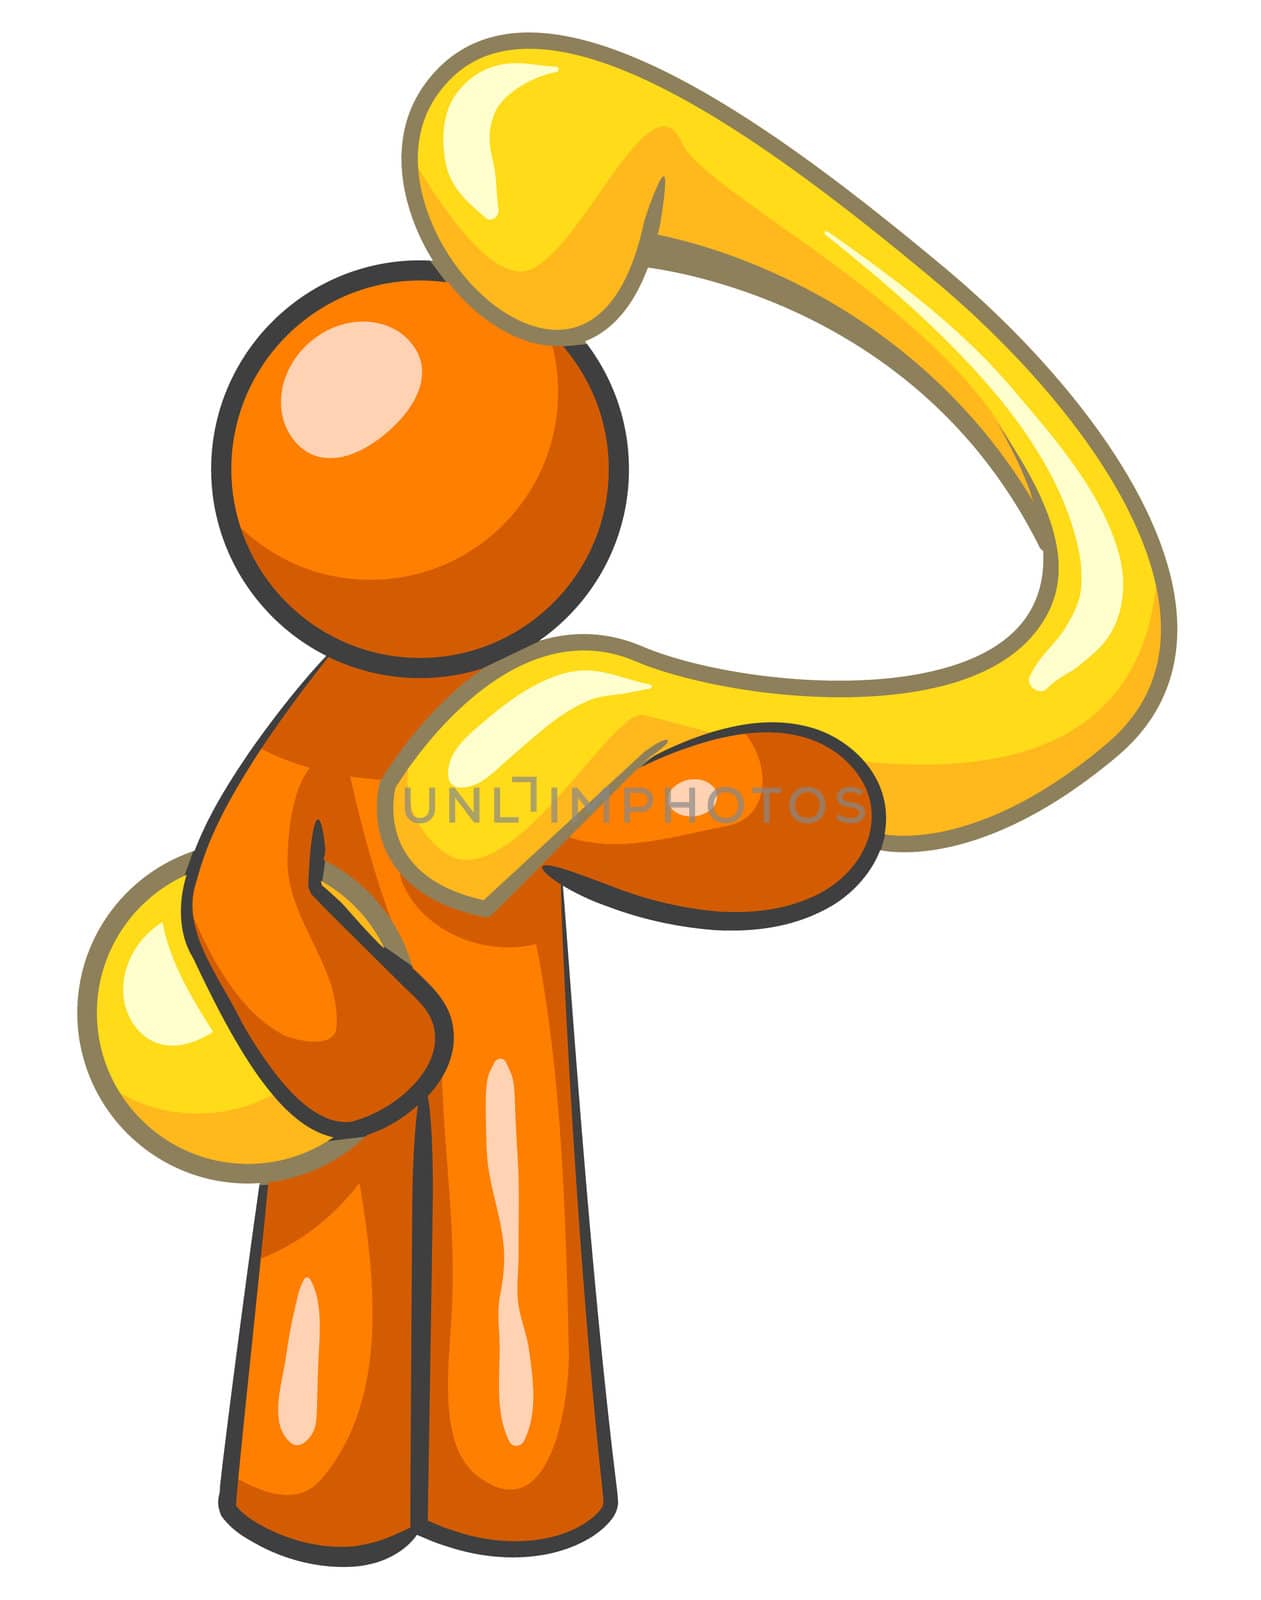 An orange man holding a large gold question mark.